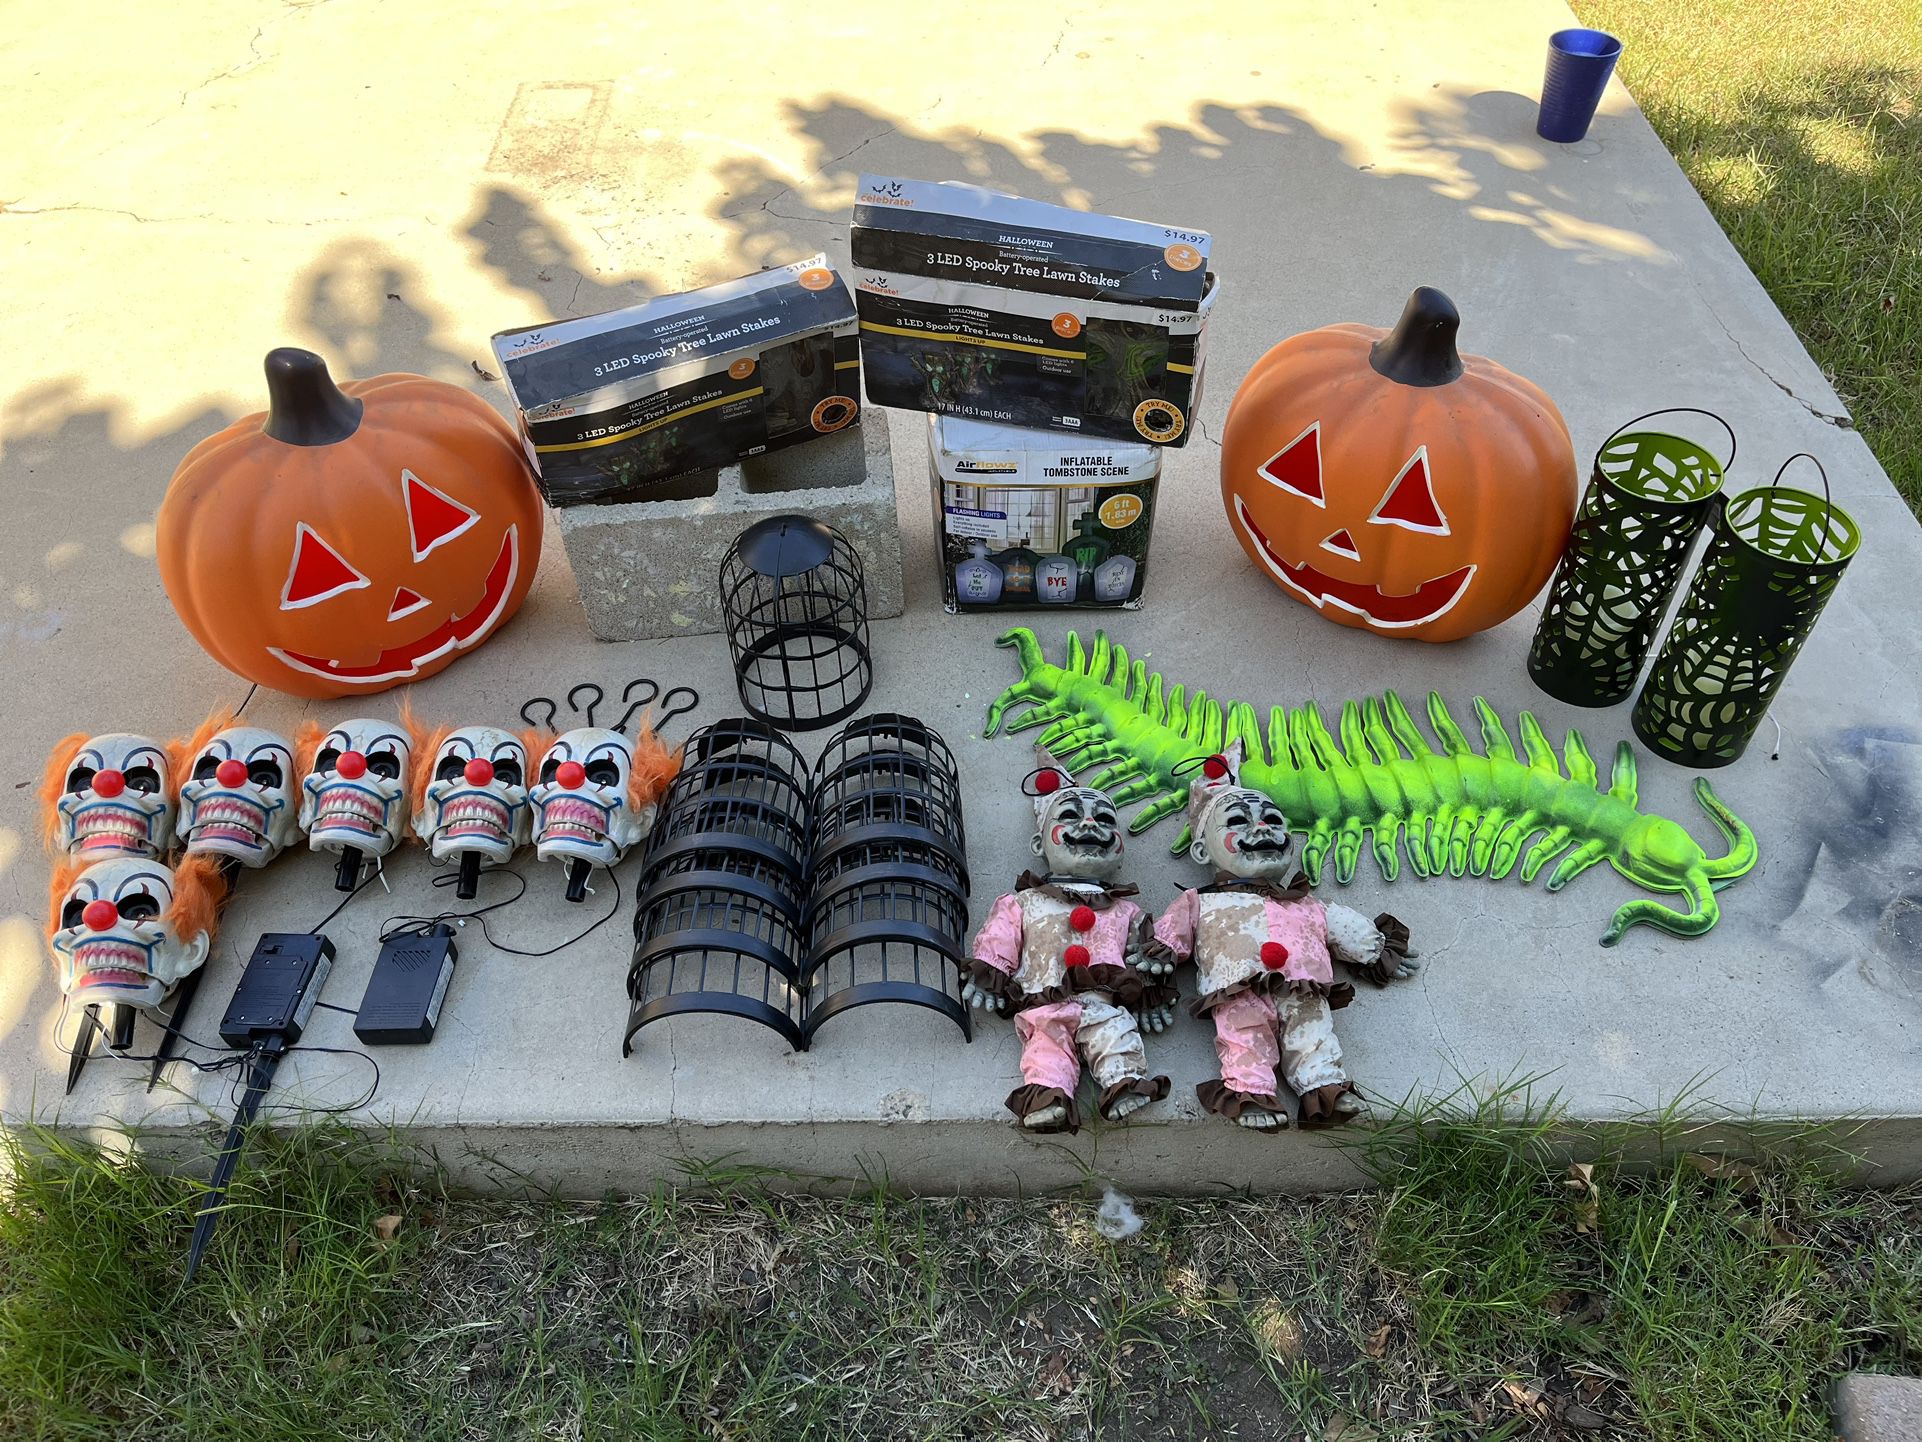 Halloween Props And Costumes For Sale!